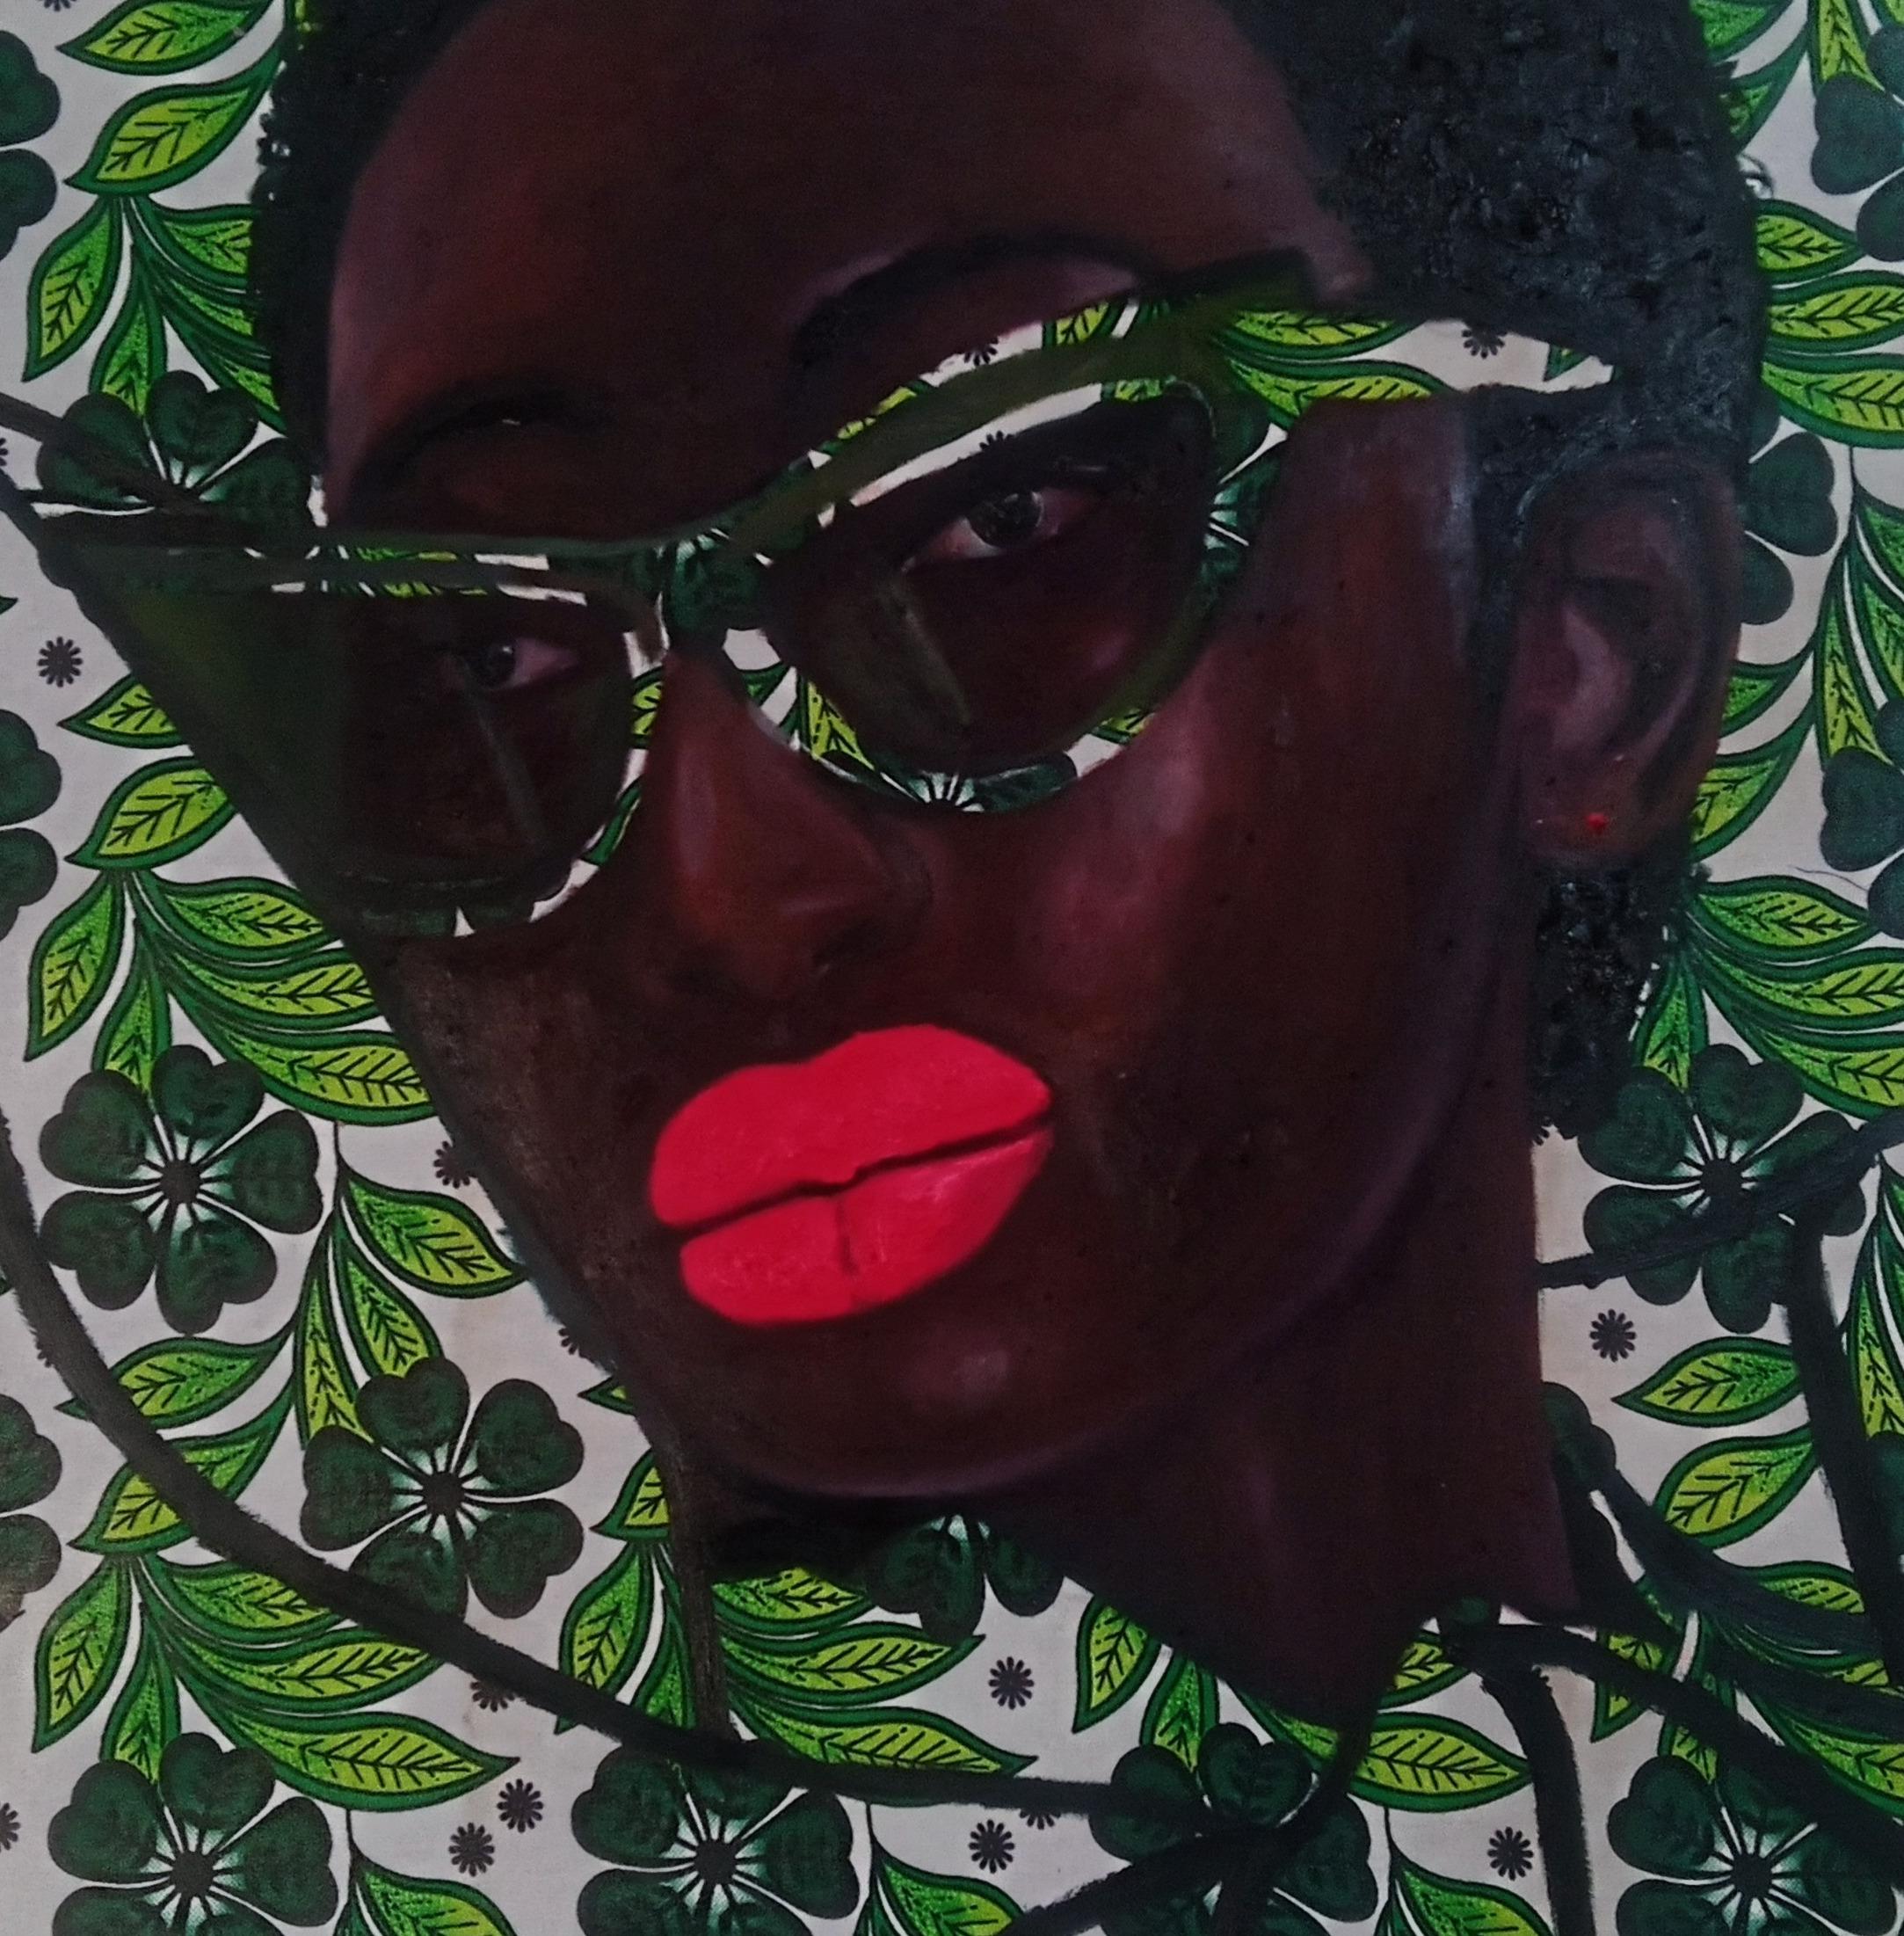 Beauty in Her Space - Contemporary Painting by Bakare Abubakri-sideeq Babatunde